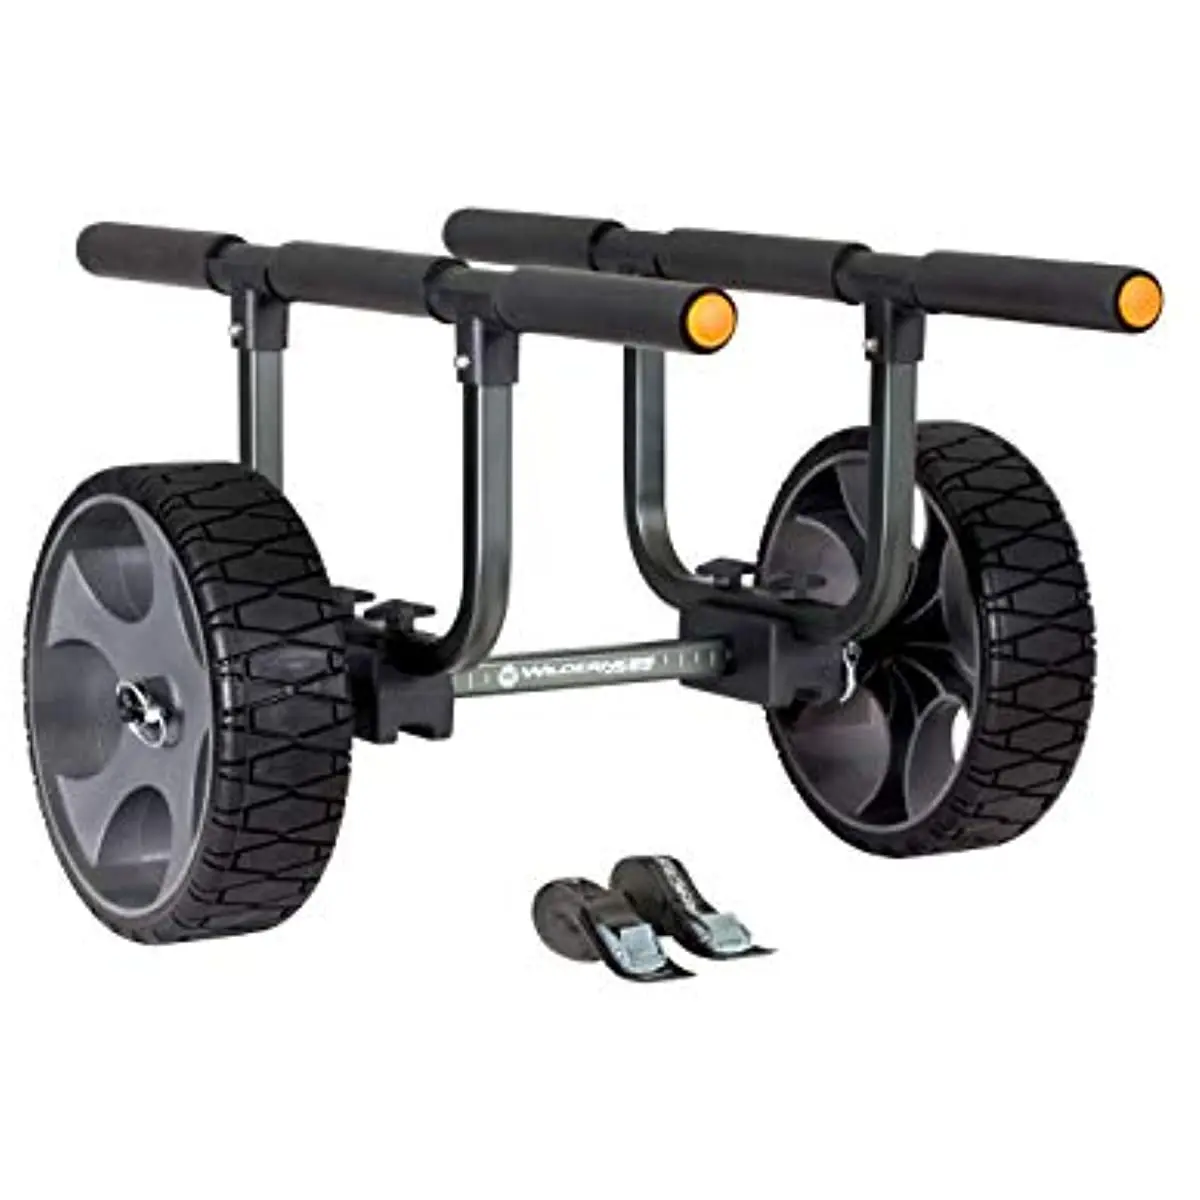 

Wilderness Systems Heavy Duty Kayak Cart | Flat-Free Wheels | 450 Lb Weight Rating | for Kayaks and Canoes